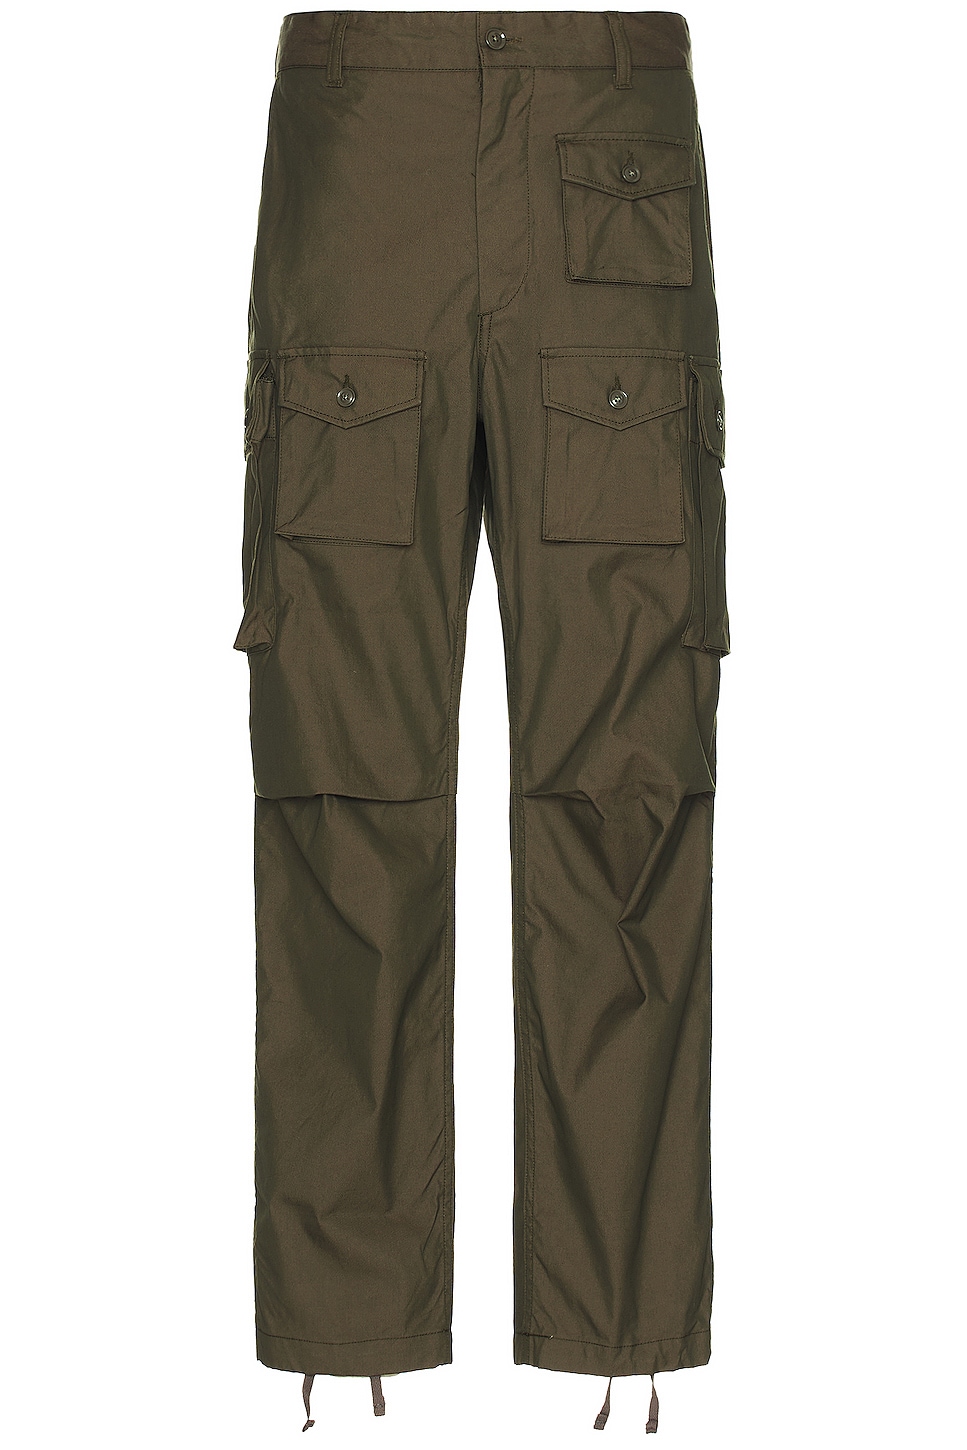 Image 1 of Engineered Garments Fa Pant in Olive